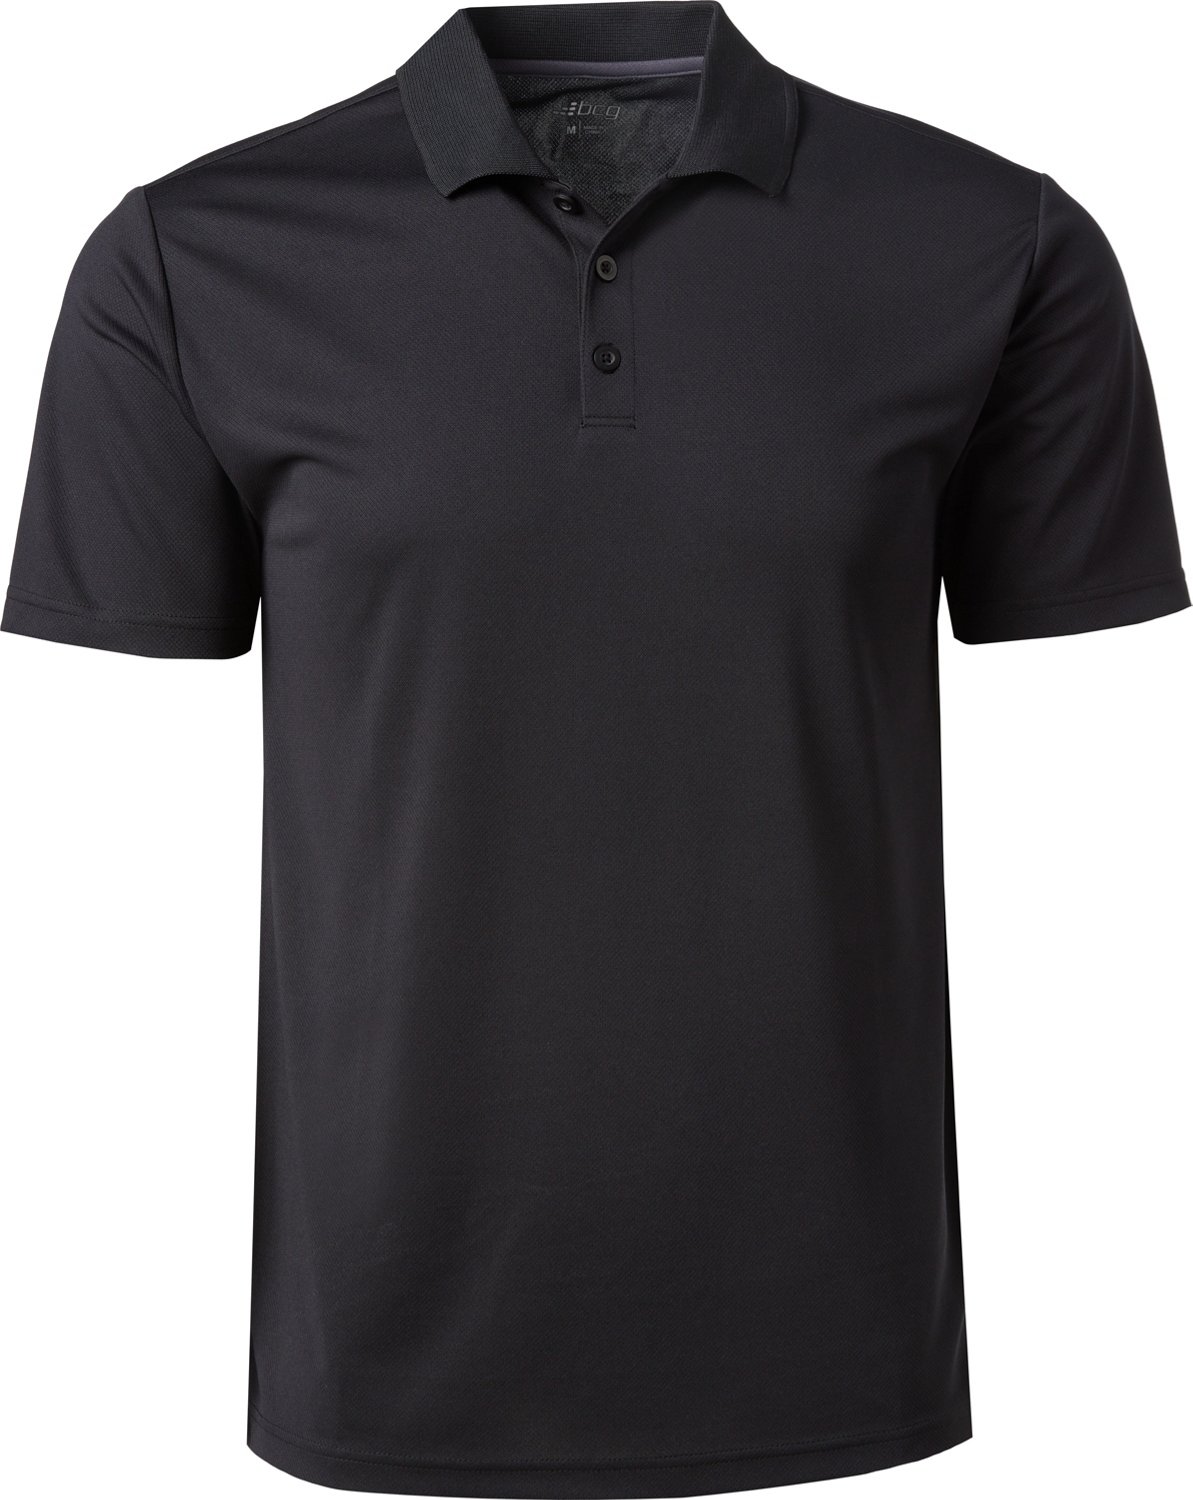 BCG Men's Coaches' Polo Shirt                                                                                                    - view number 1 selected